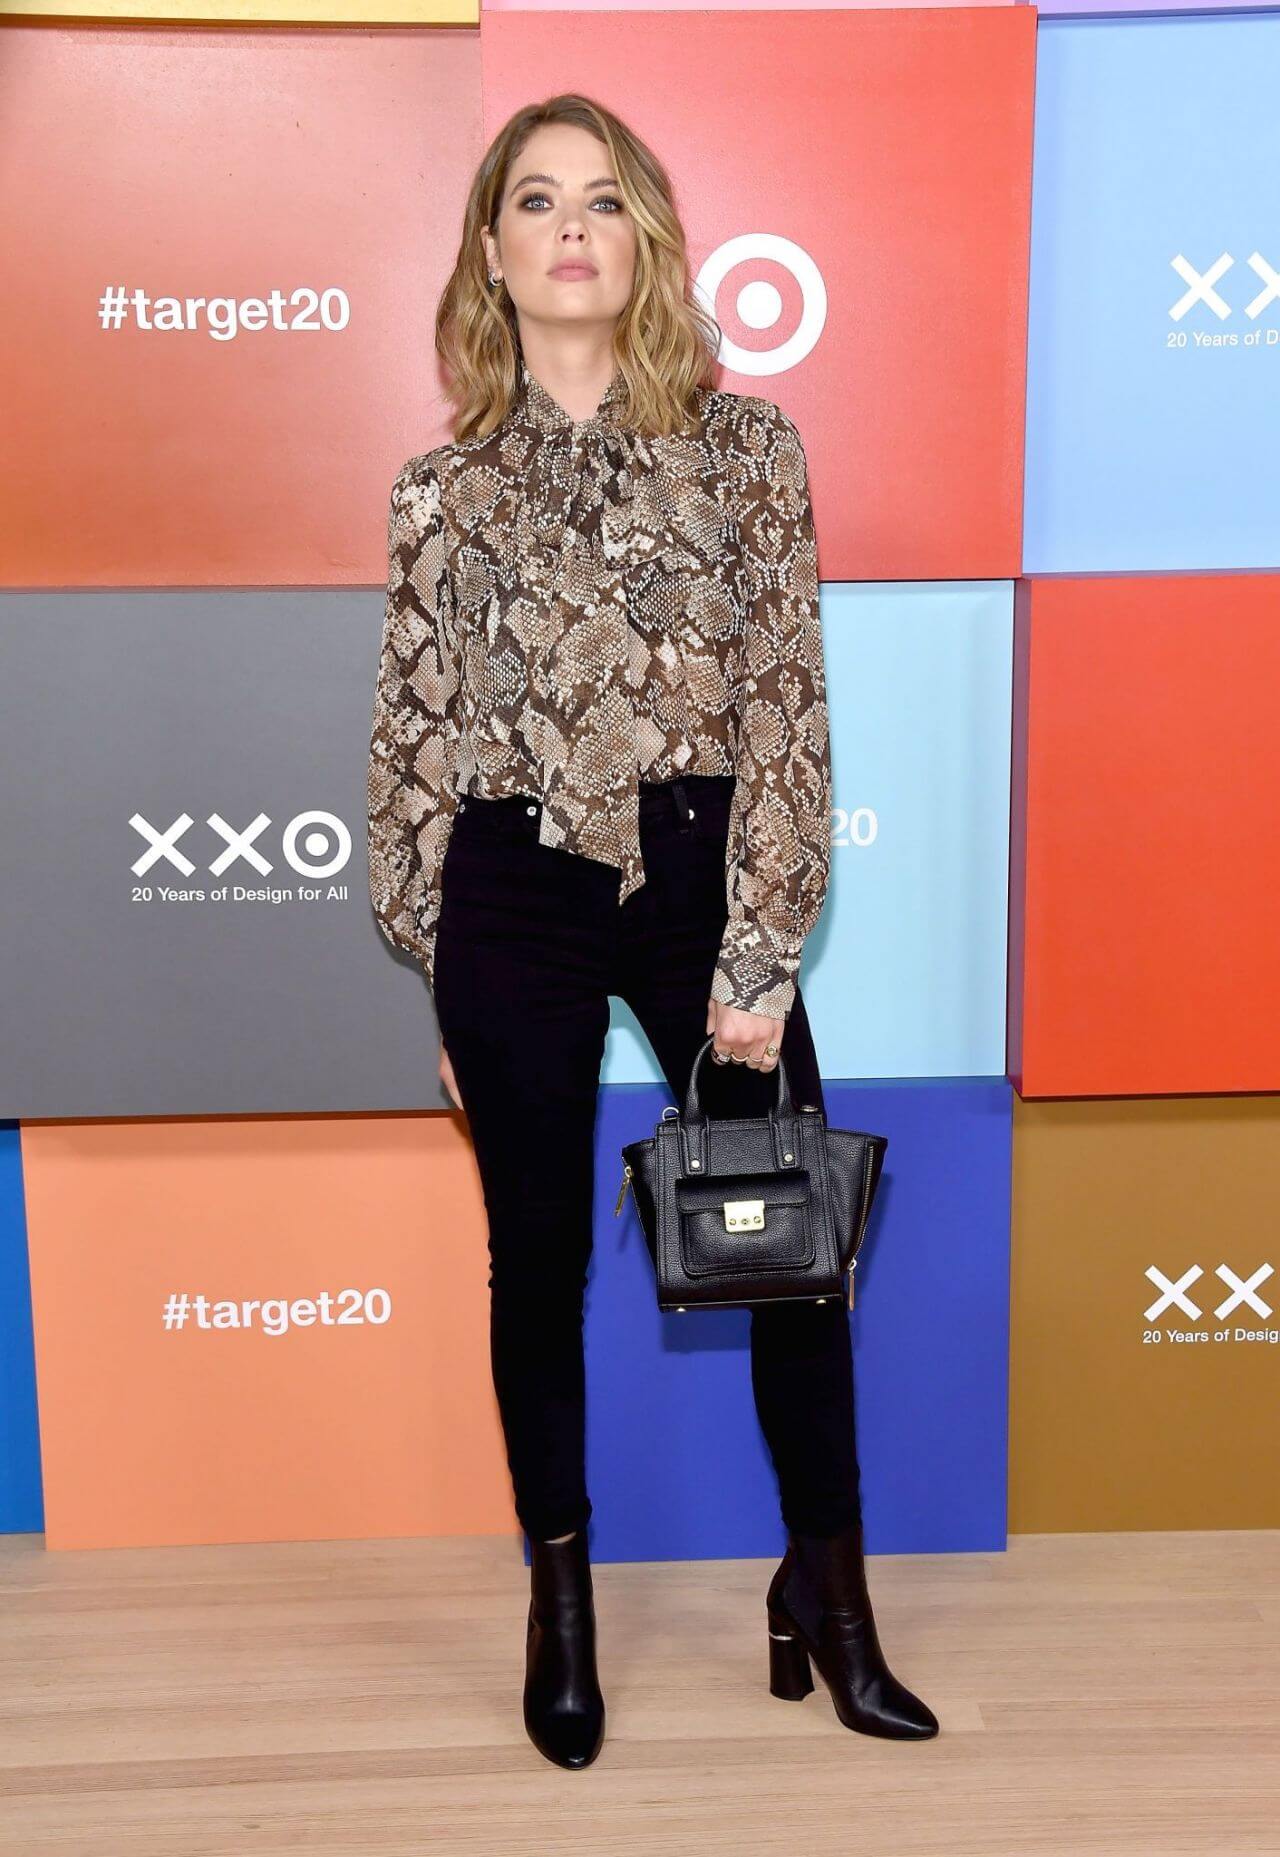 Ashley Benson In Printed Full Sleeves Top With Black Jeans At Target 20th Anniversary Collection in NY